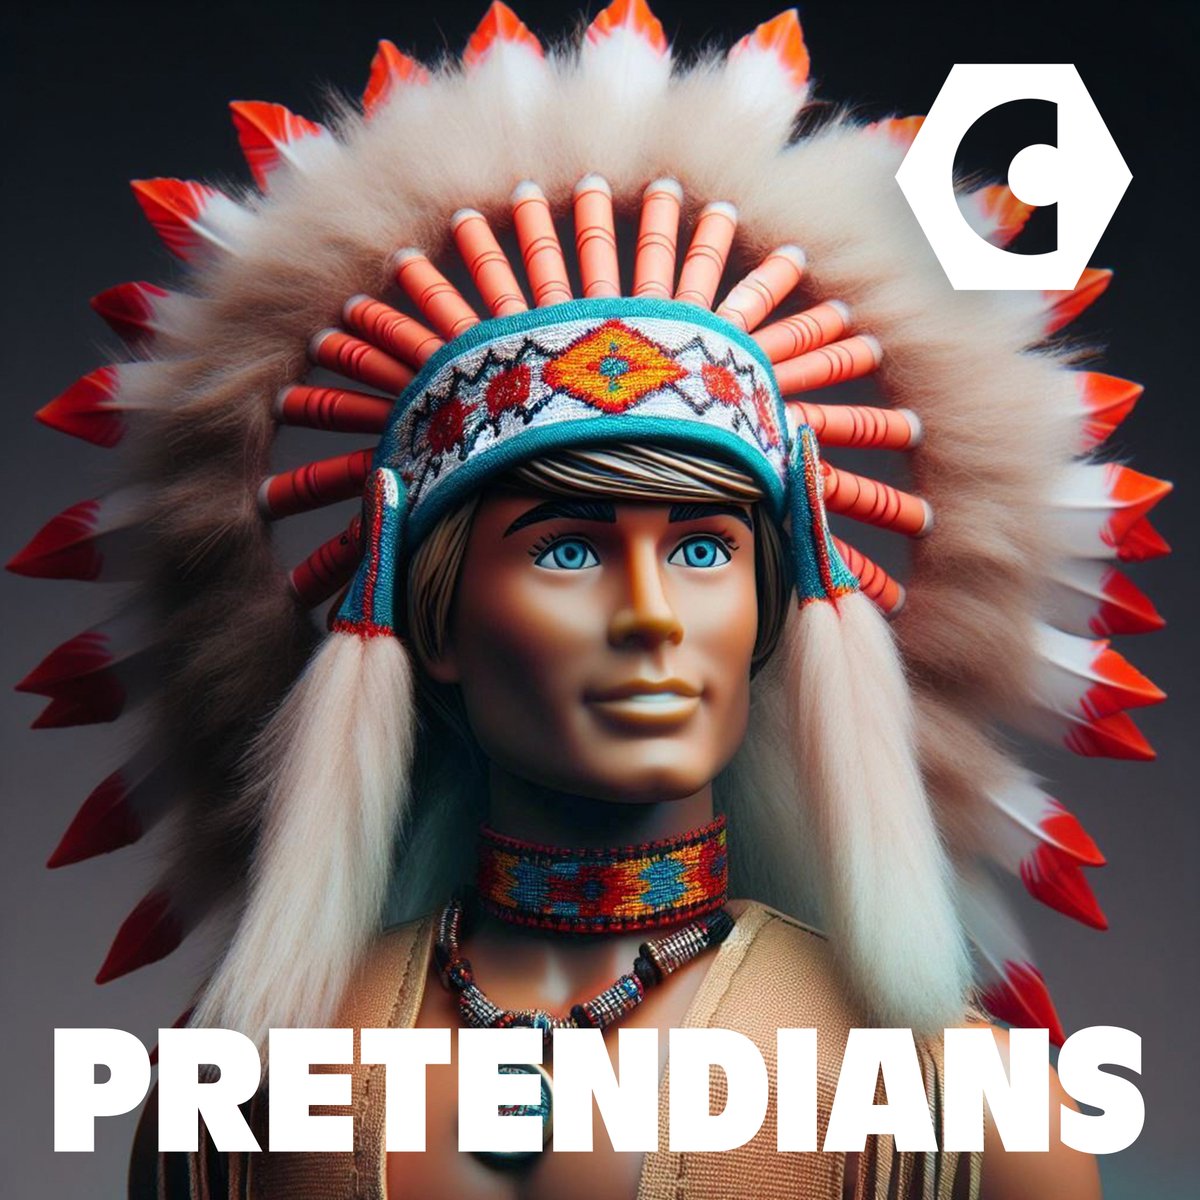 I've got this podcast series starting tomorrow - called Pretendians. And if my memory serves me correctly, this might be the first pretendians project that doesn't revolve around white women. That's one of the ways we're taking a different approach with the series.